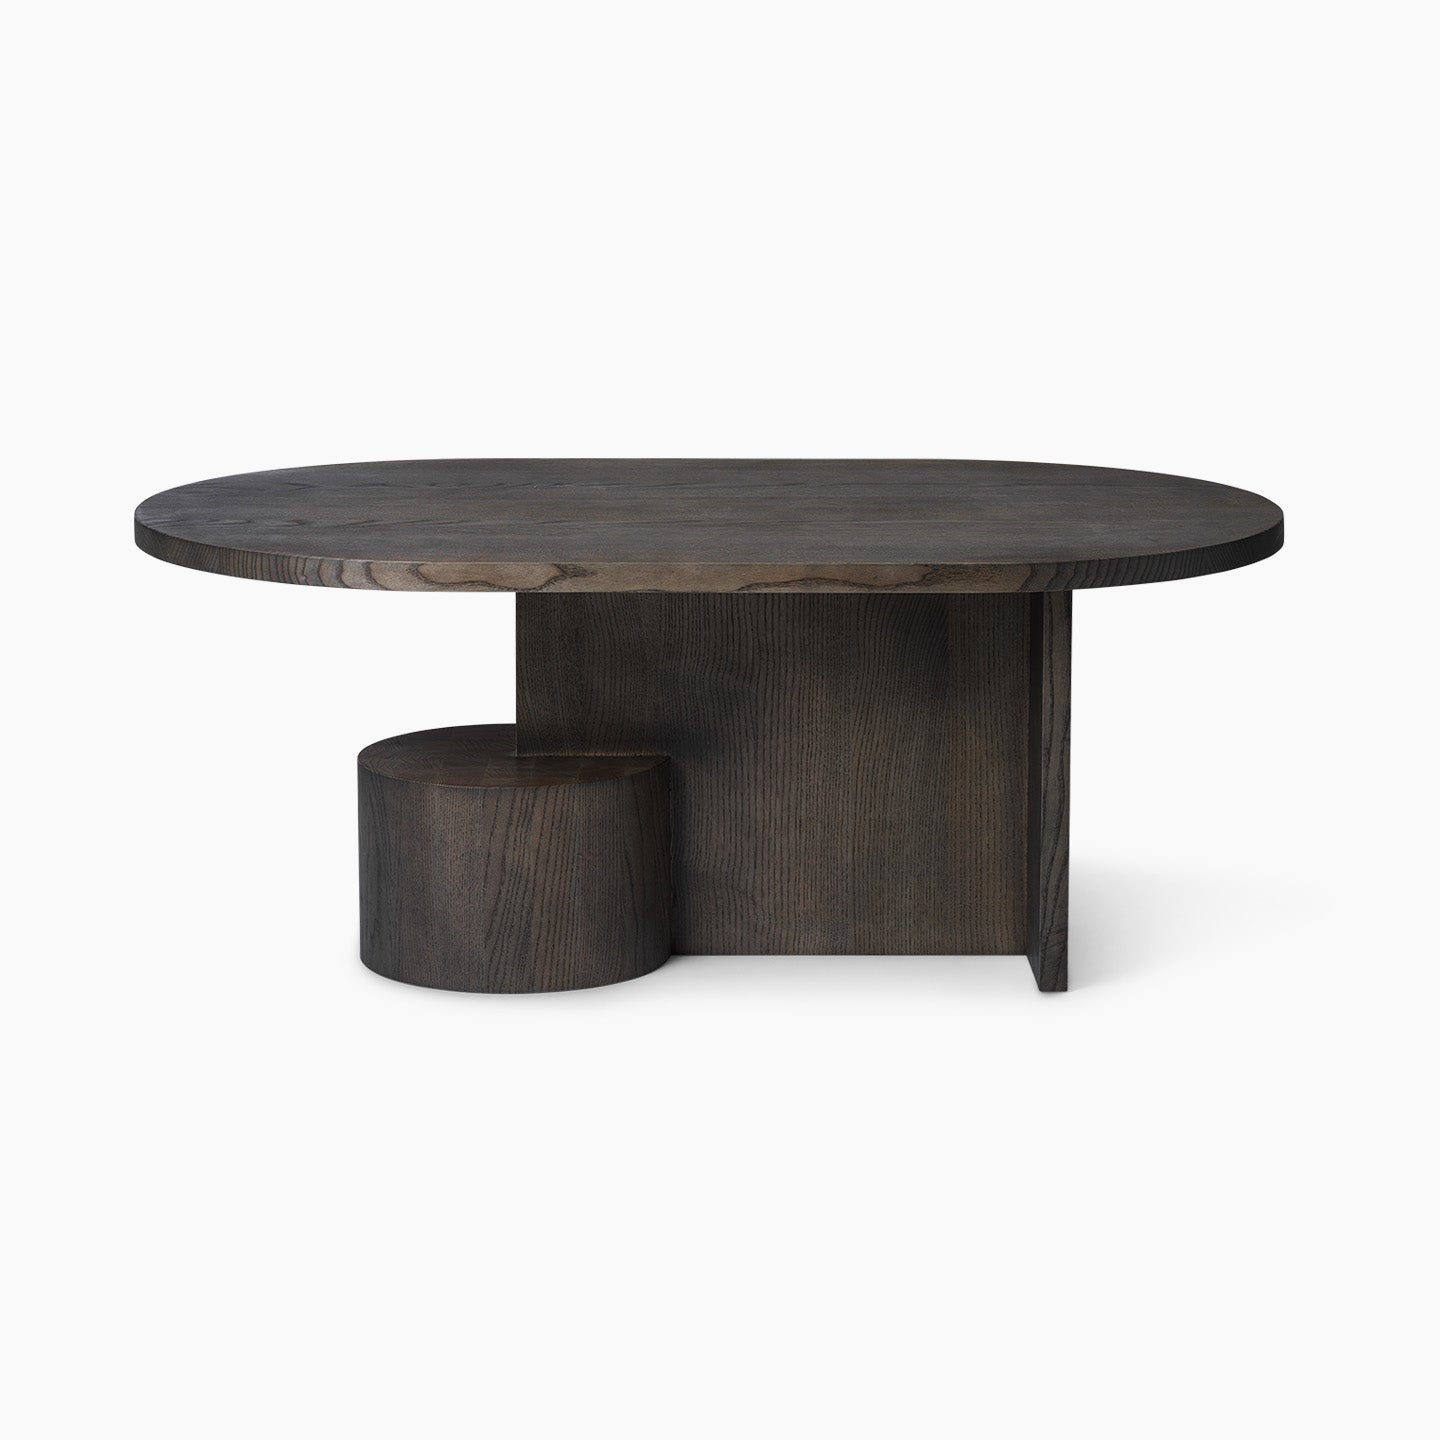 Insert Coffee Table - Black Stained Ash